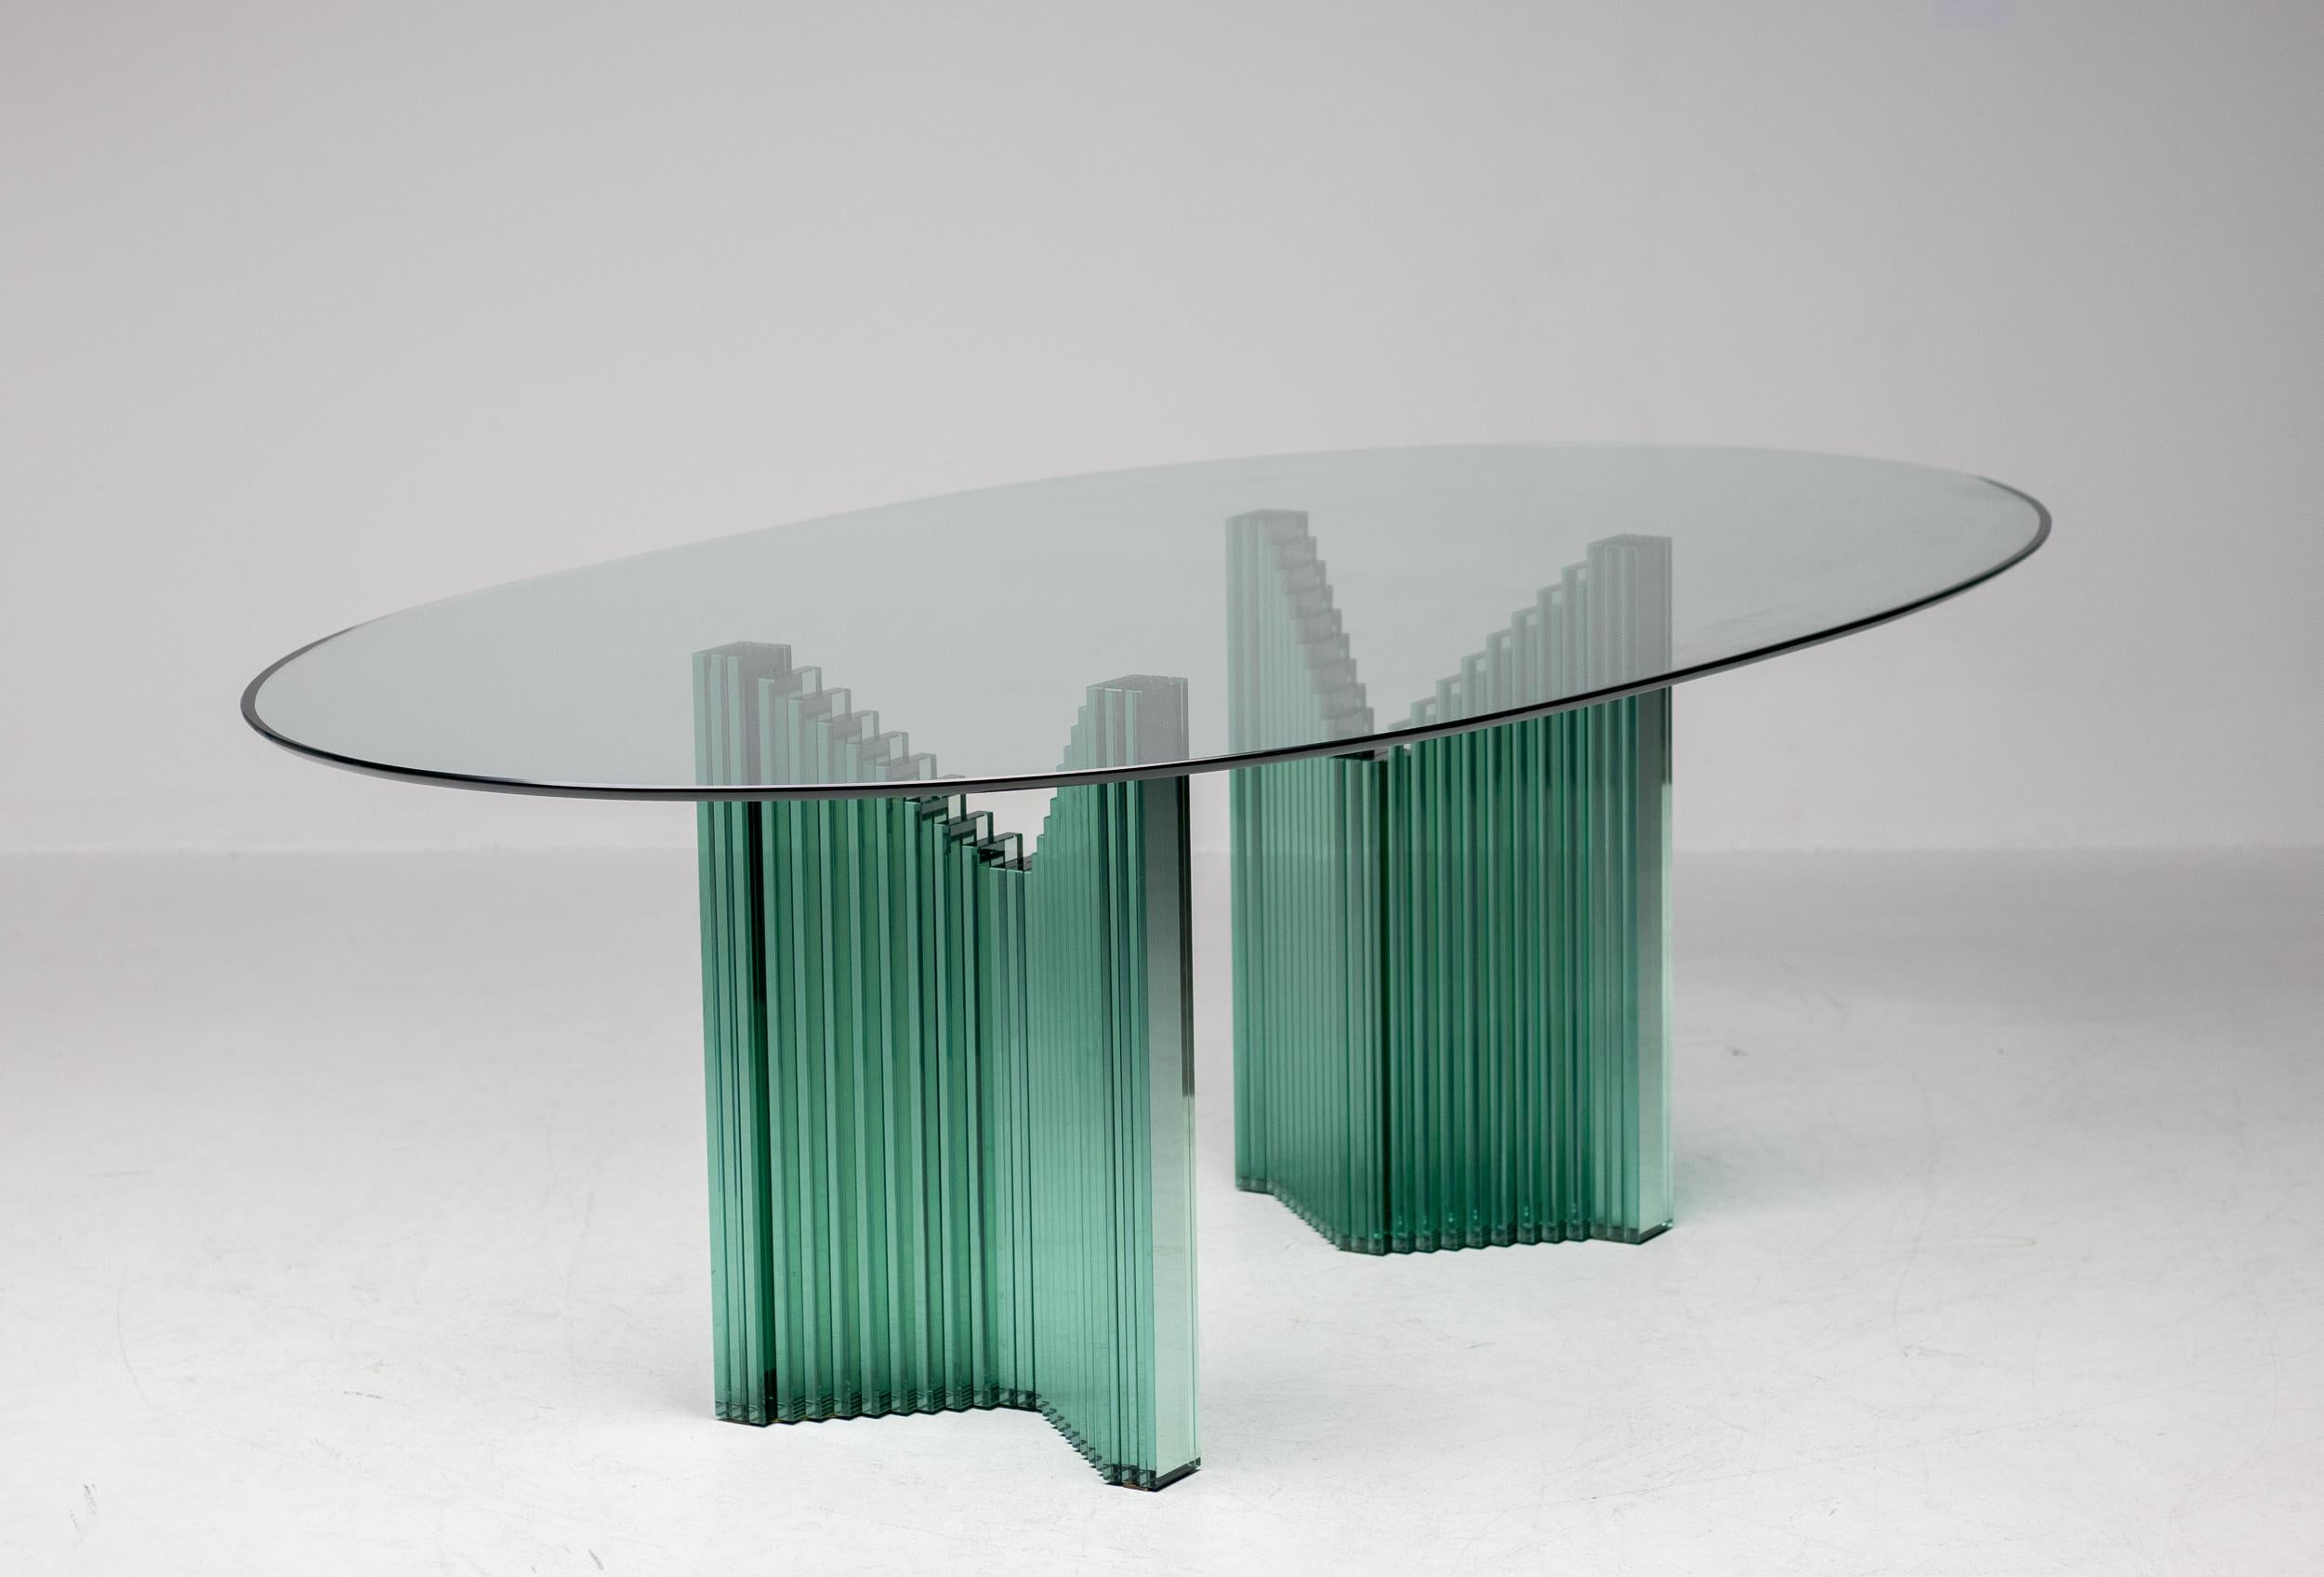 Versatile oval all glass table designed circa 1980 by Luigi Massoni for Gallotti & Radice.
Useable as a desk or a conference table depending on how the 2 glass bases are placed underneath the top.
Placed inside out it is a very impressive large